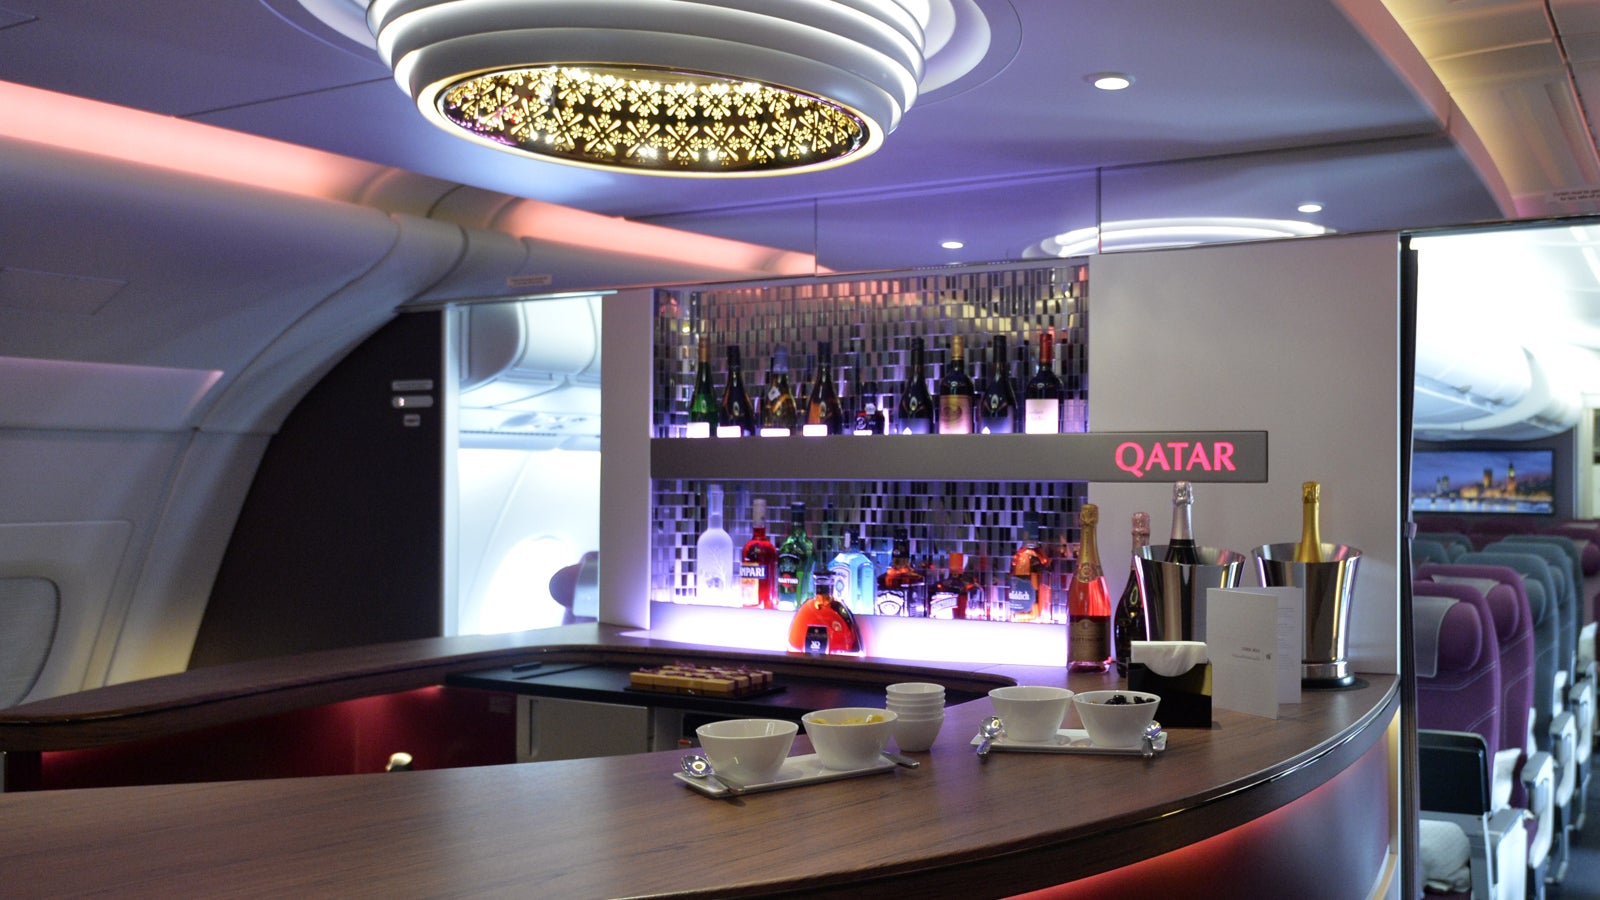 Qatar Airways: Reviews, Guides, and News - The Points Guy